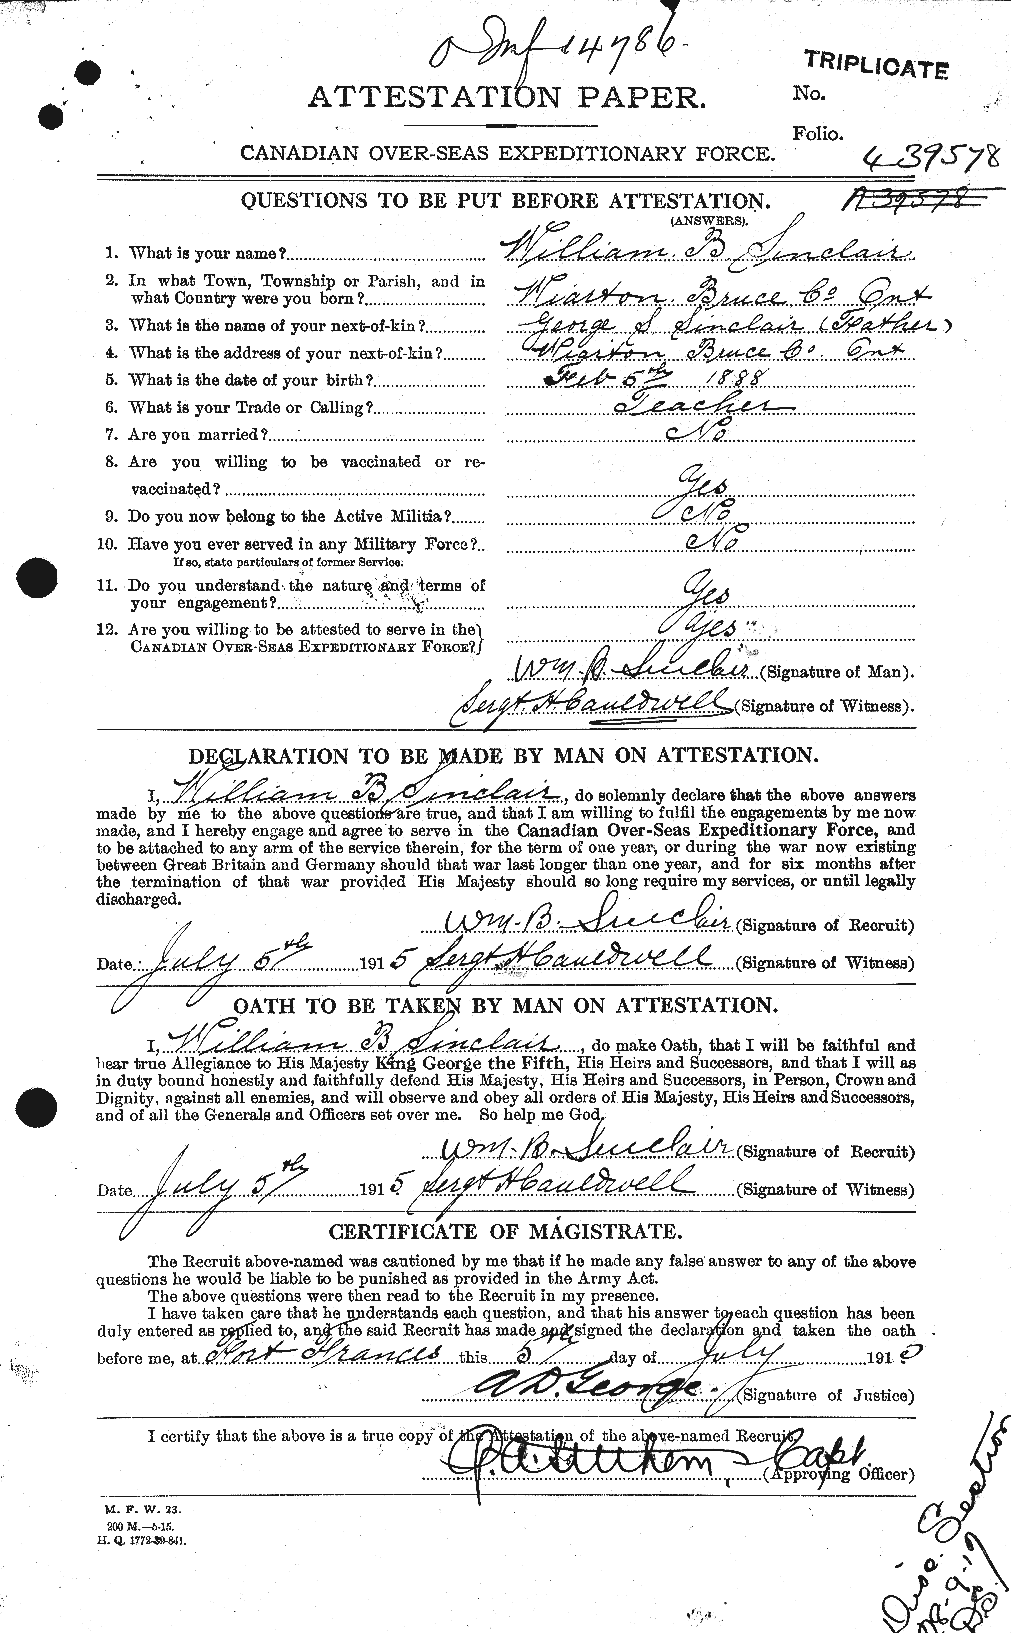 Personnel Records of the First World War - CEF 101583a